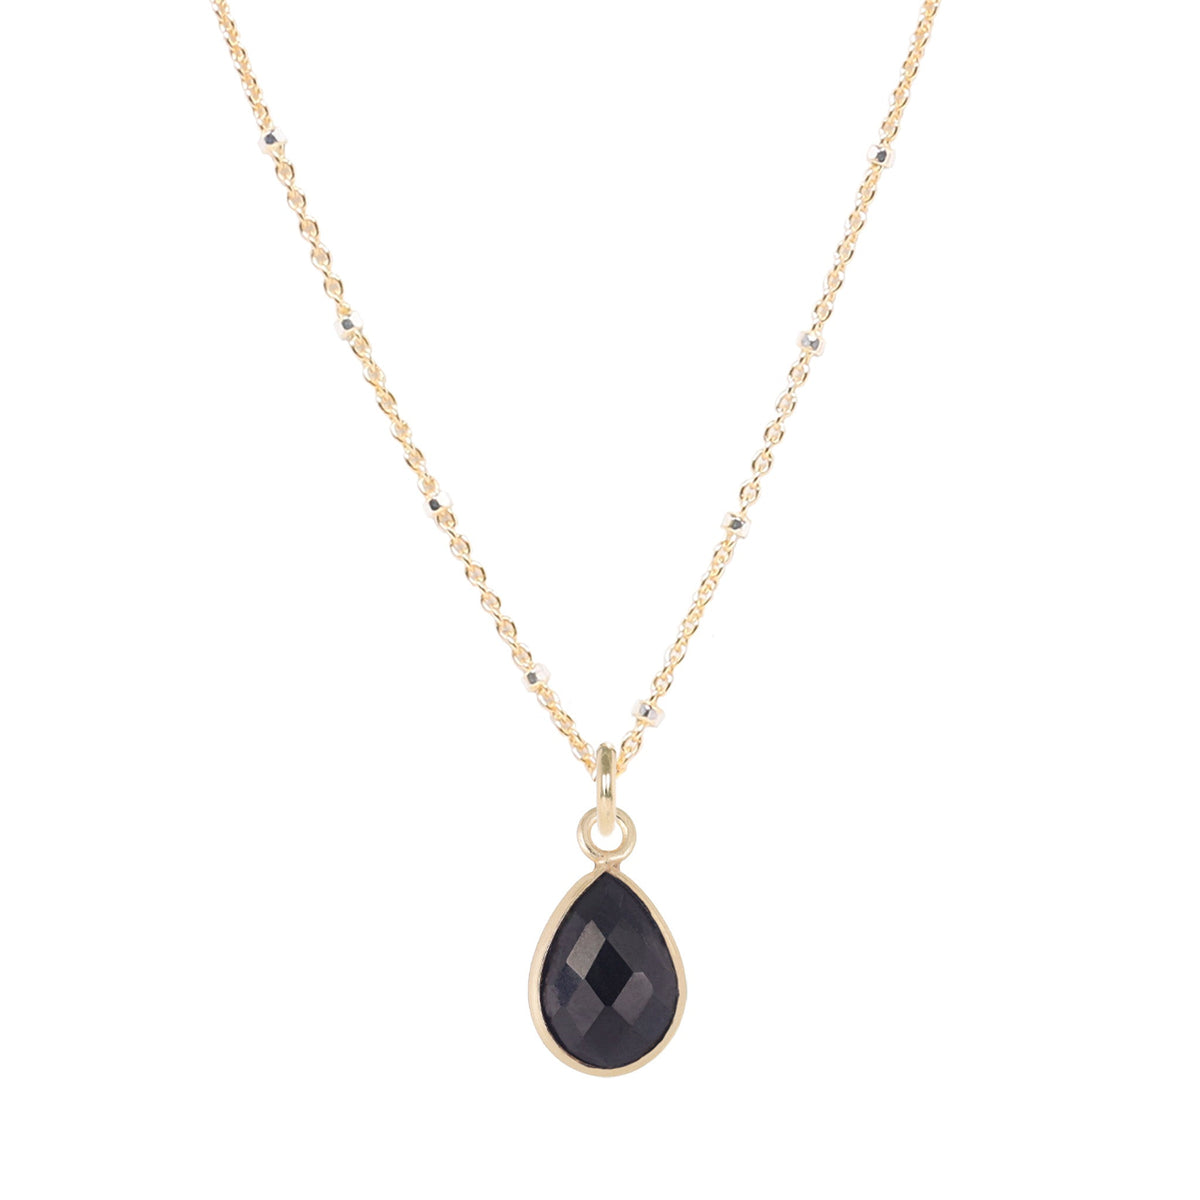 Gold Platted Sterling Silver Chain with Teardrop Black Spinal in Gold Platted Sterling Silver Bezel